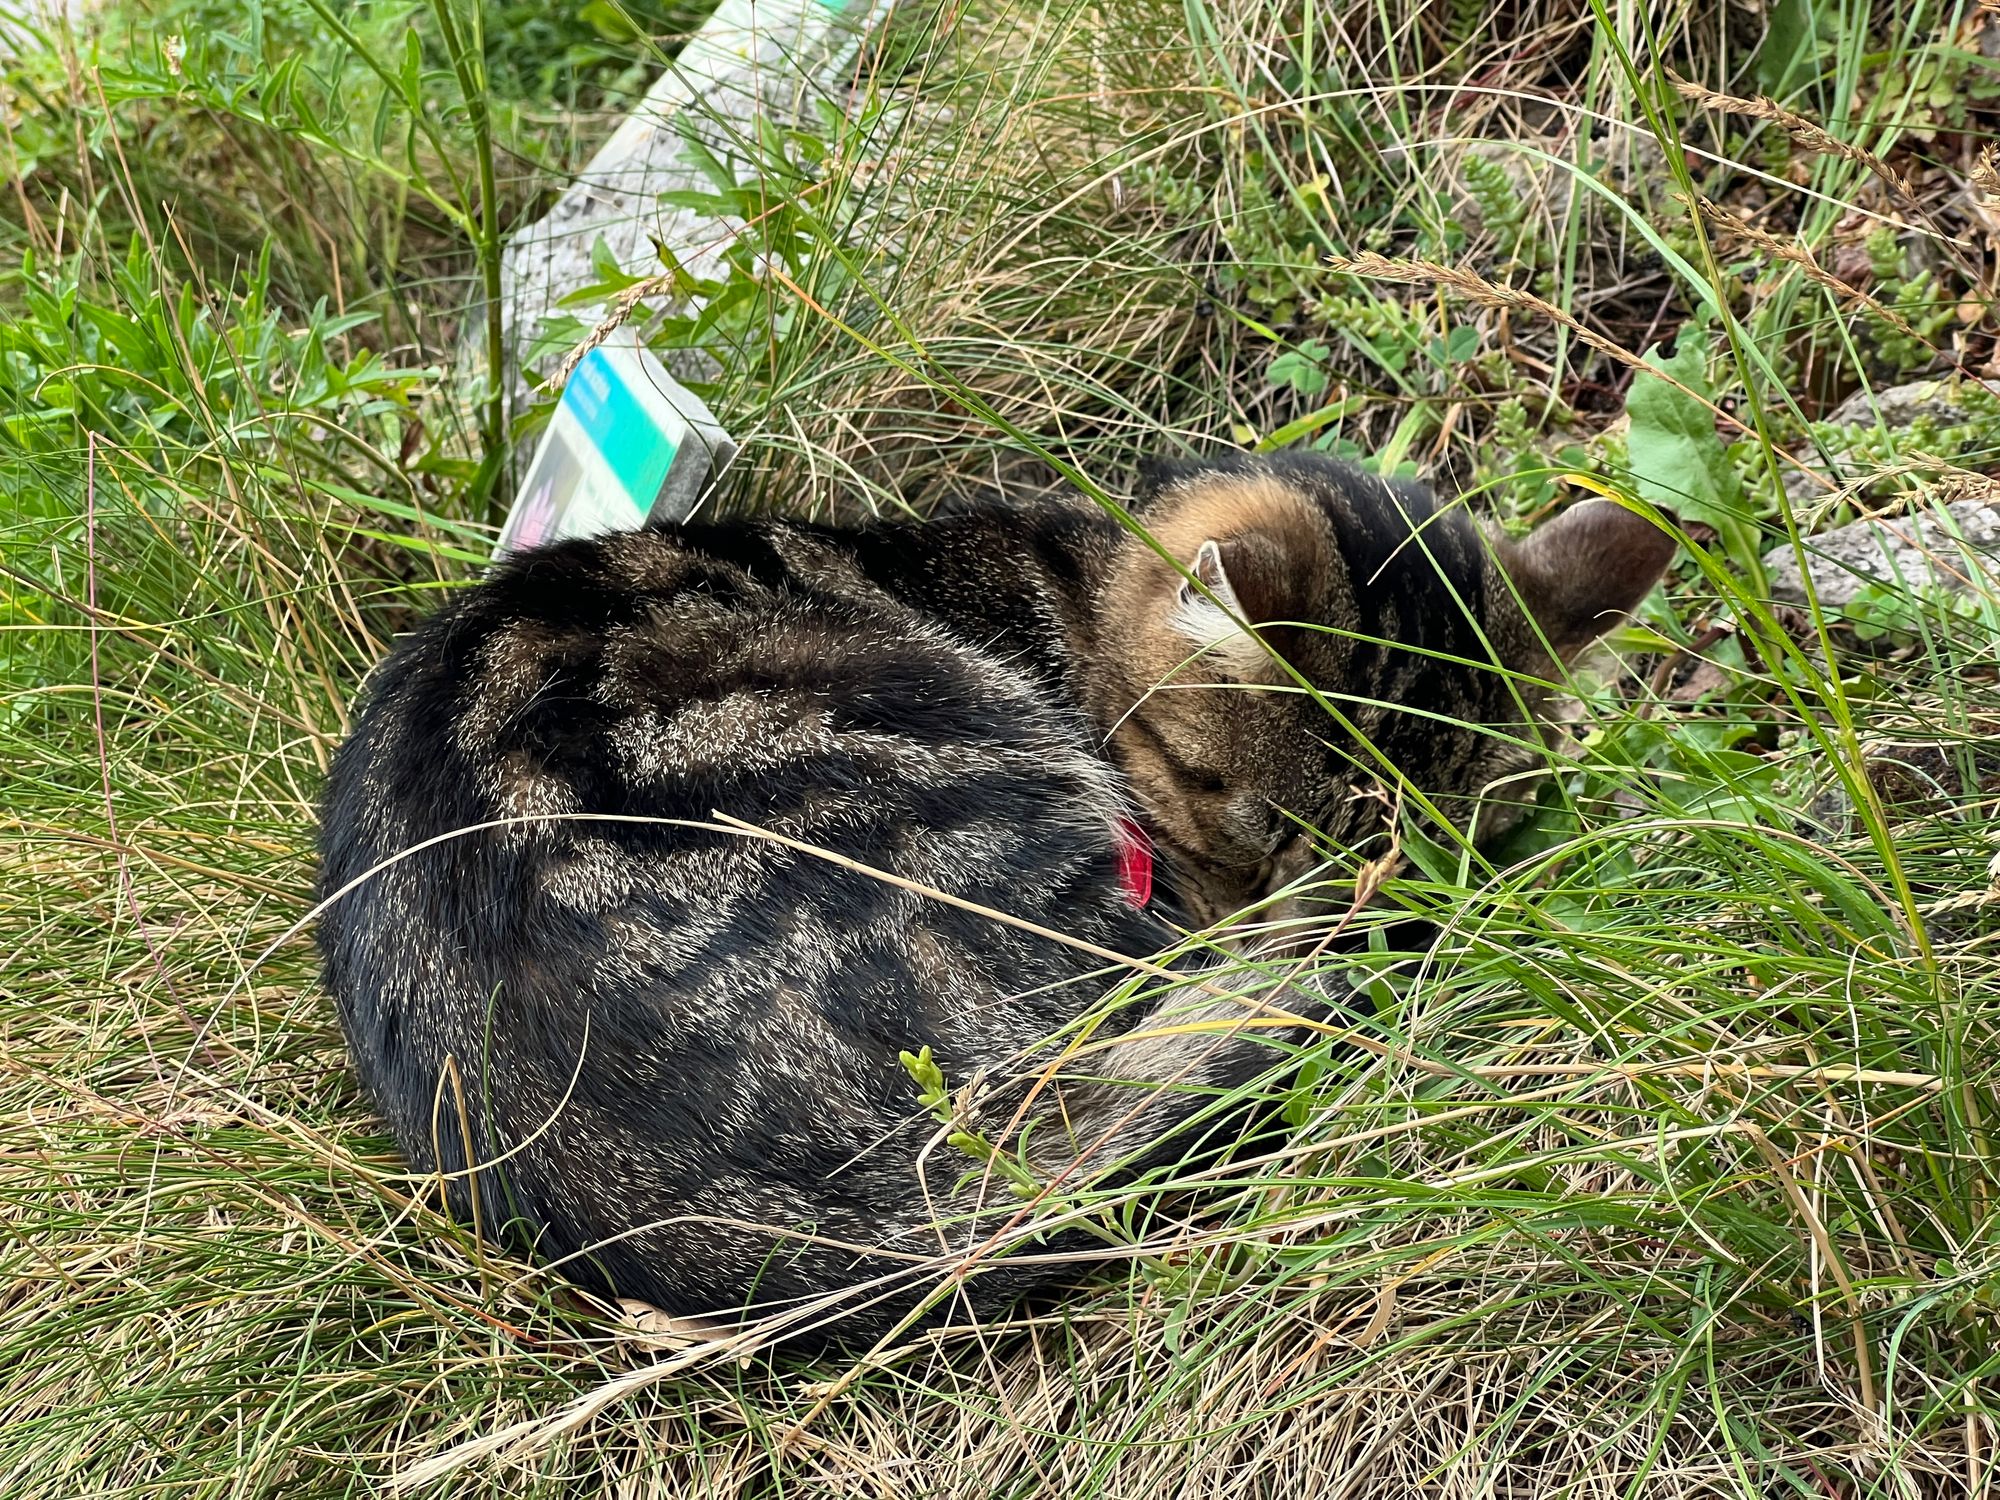 A tabby cat curled up next to a sign in a grassy flowerbed.